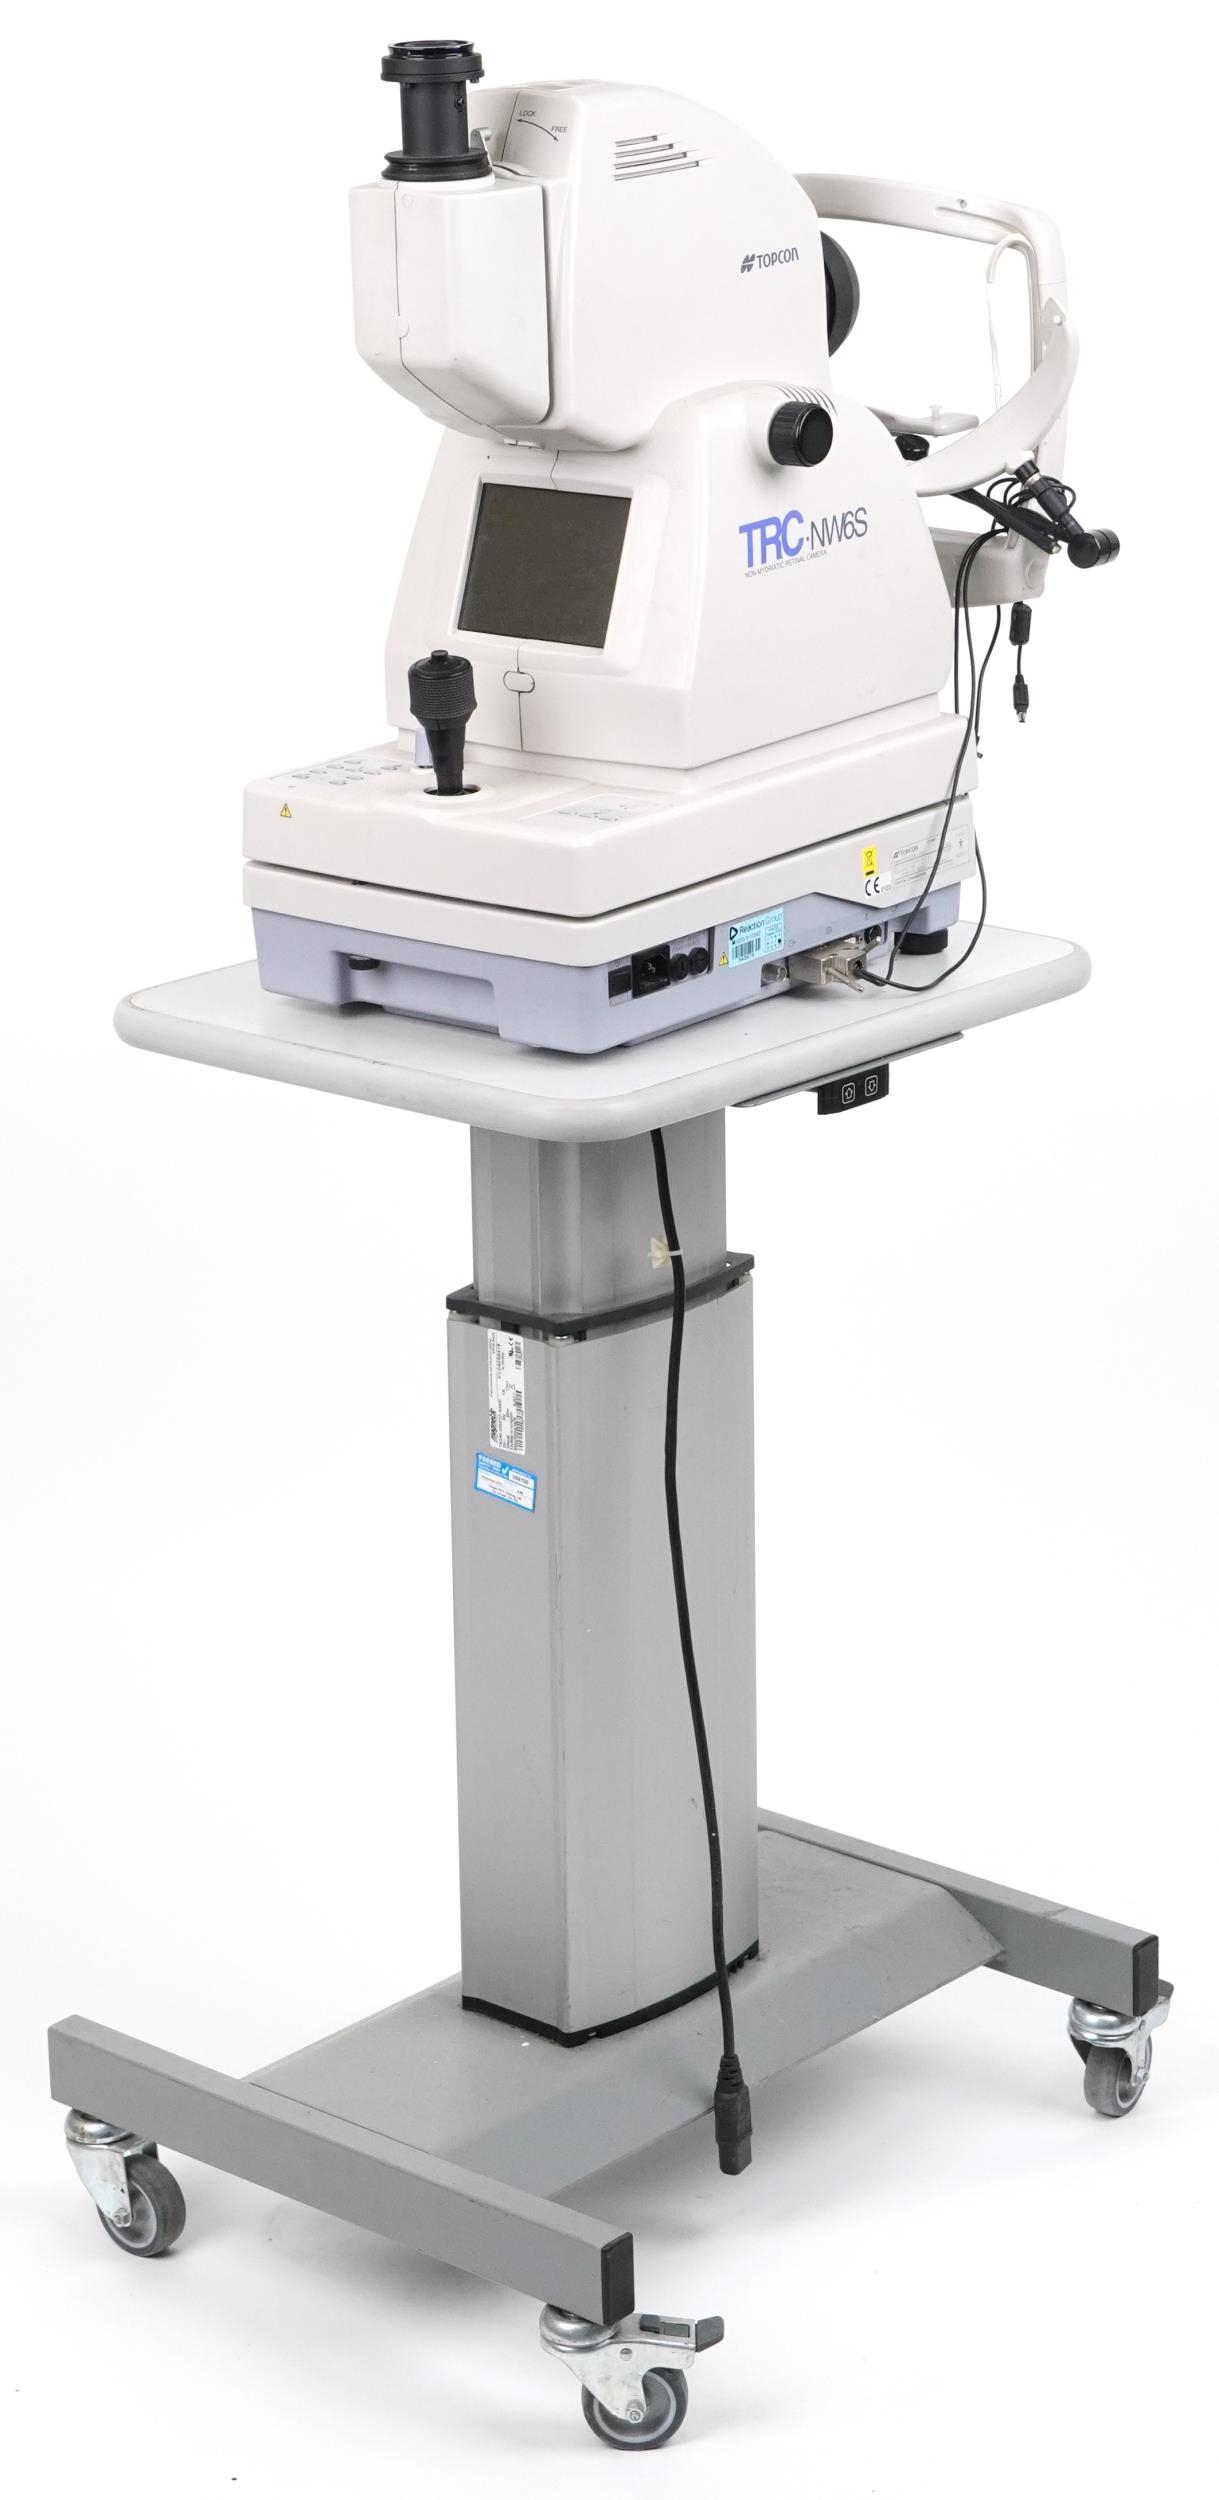 Topcon TRC NW6S Non-Mydriatic retinal camera on electric rise and fall table with Nikon D80 camera - Image 3 of 3